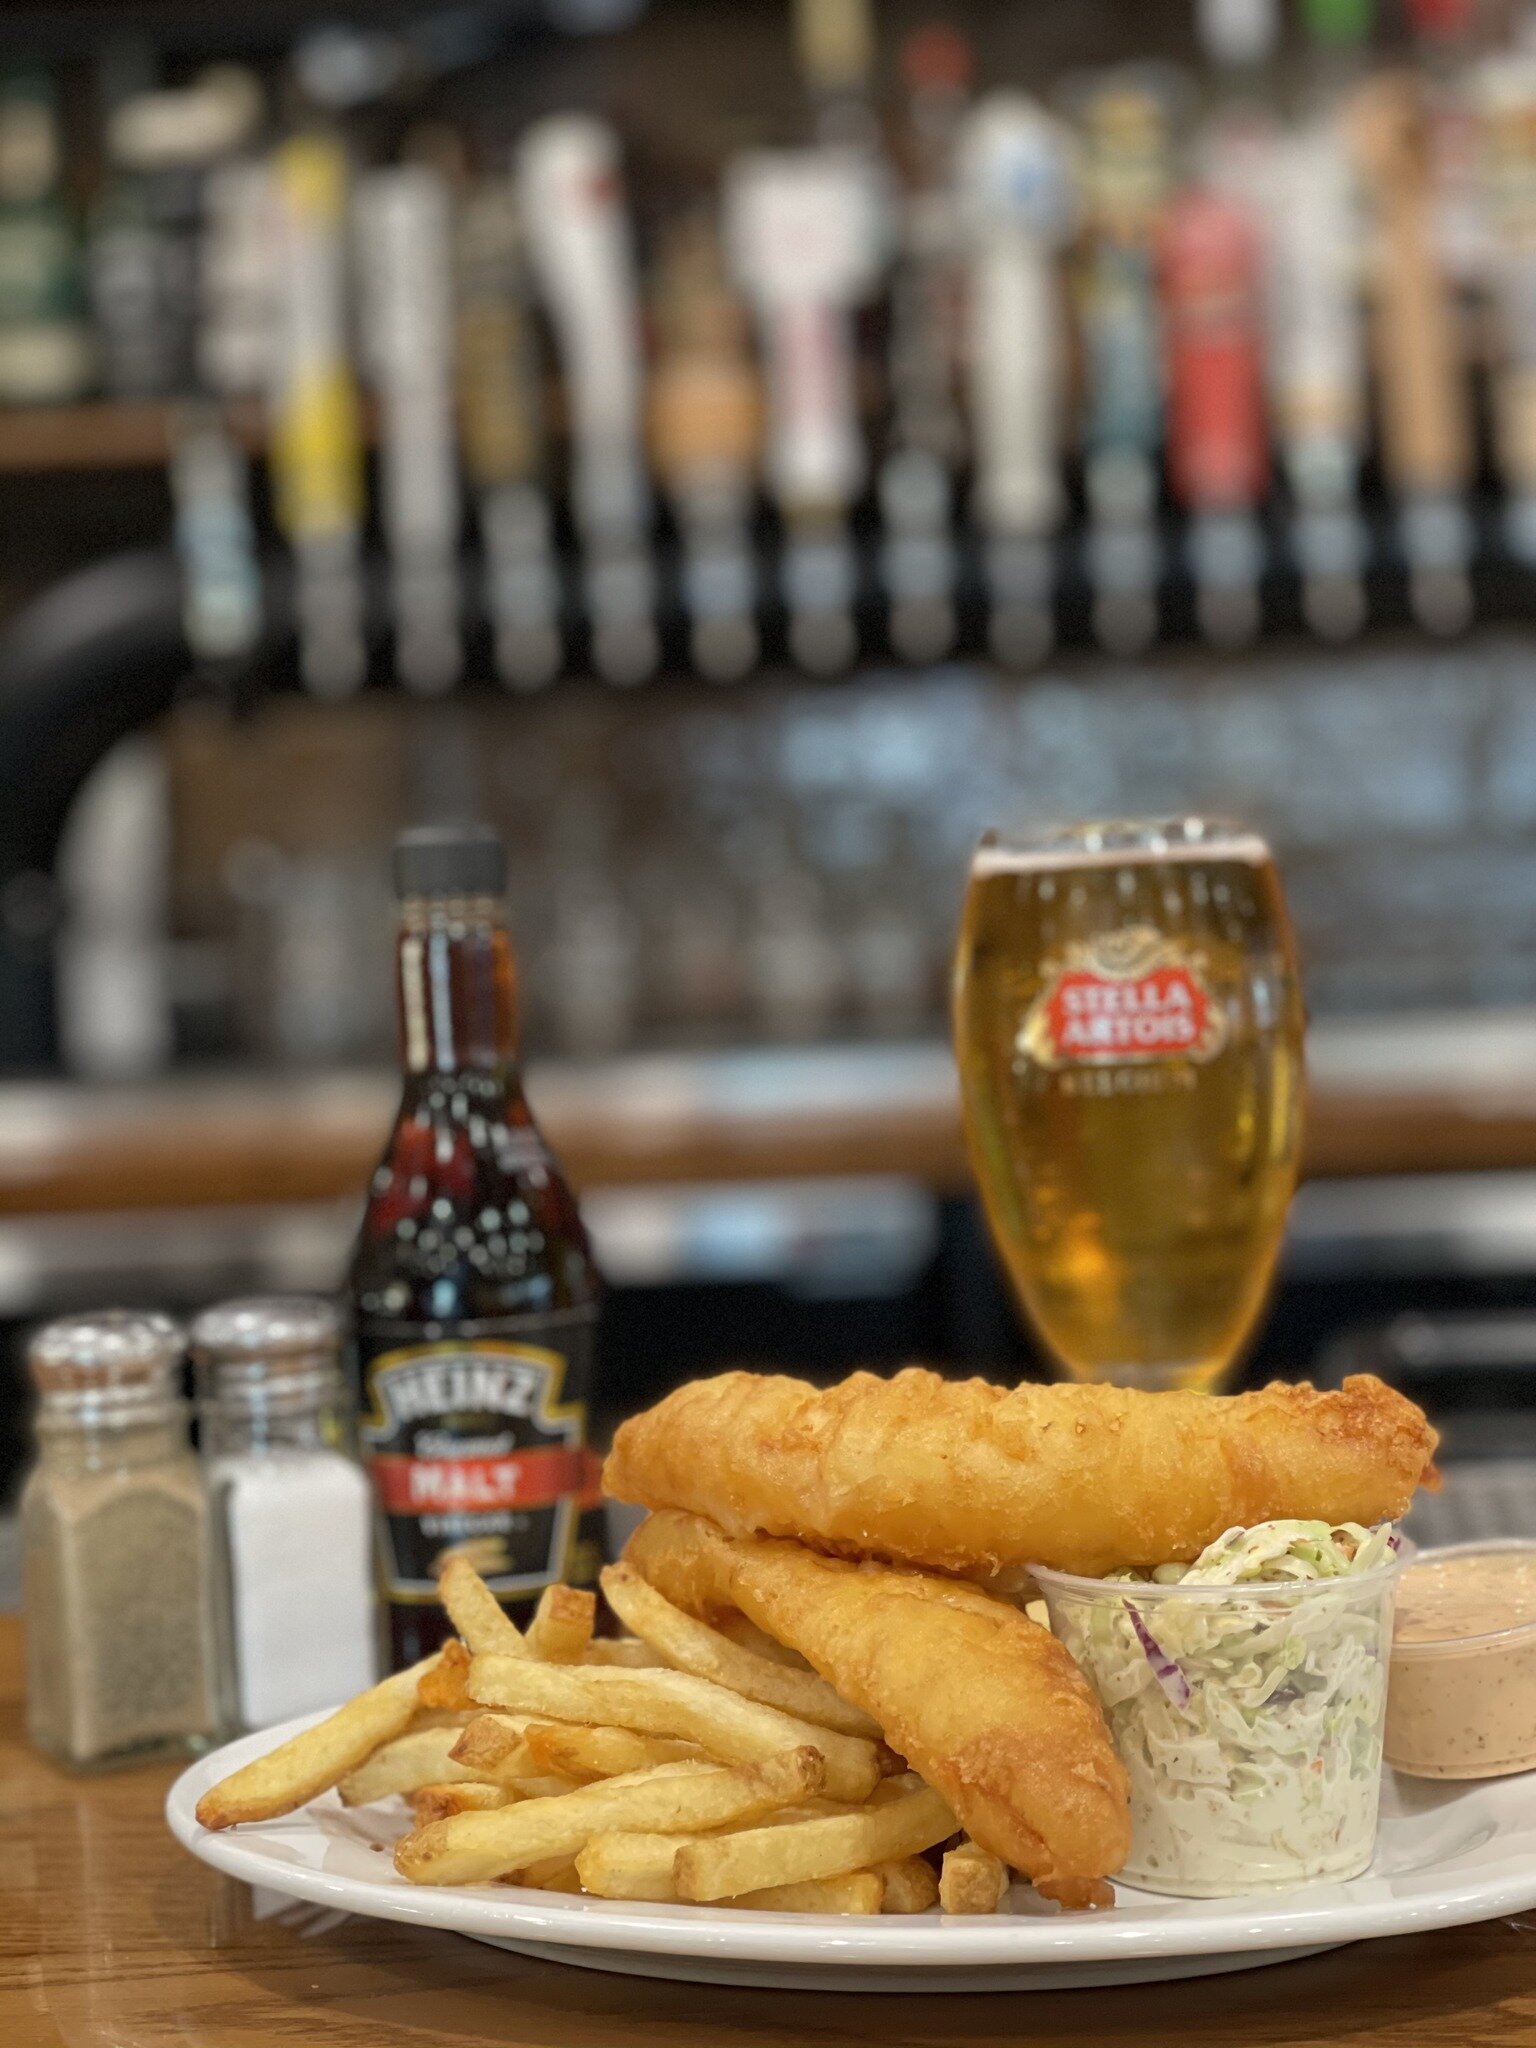 Wednesday is Fish Fry @ The Hangout!!

👉 &frac12; price Fish n&rsquo; Chips, Fried Fish Sandwiches, or Fried Fish Taco Plate with Any Drink Purchase!!

🔗 Order now. Link in bio.
📍901 Ocean Ave, Seal Beach, CA 90740⁣⁣⁣⁣⁣⁣⁣⁣⁣⁣⁣⁣⁣⁣⁣⁣⁣⁣⁣⁣⁣⁣
📍16490 Bo